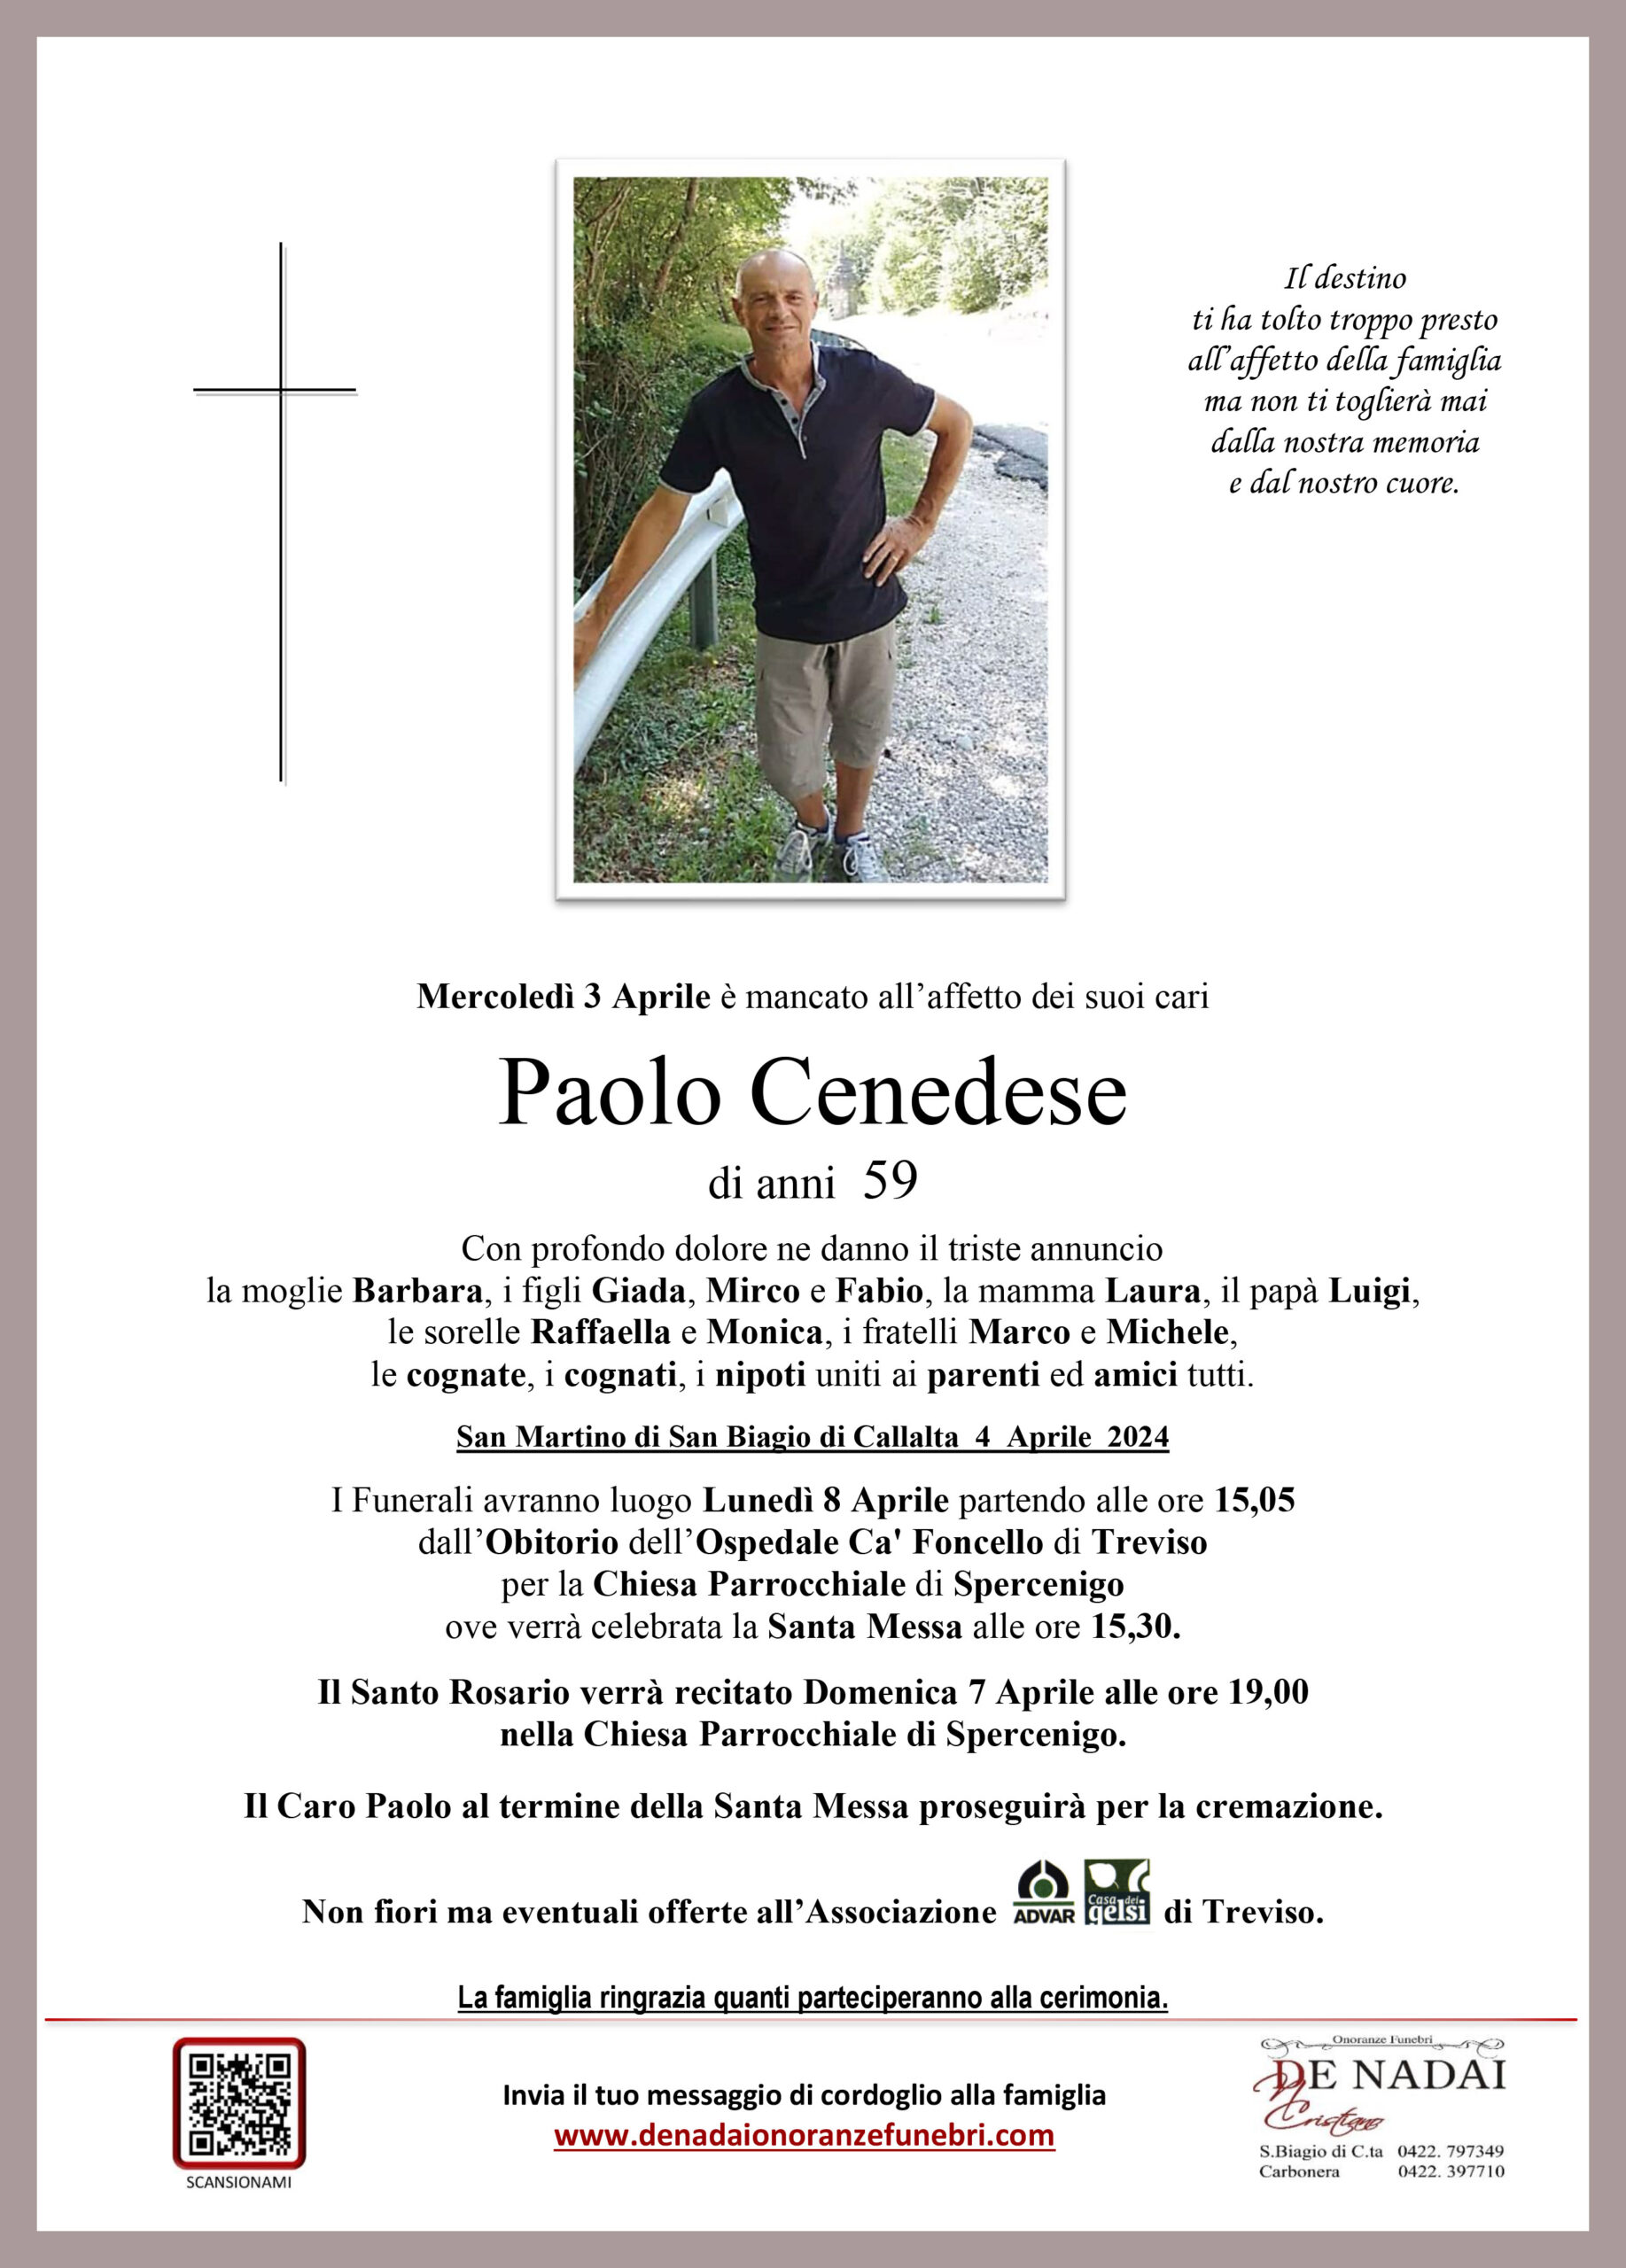 Cenedese Paolo